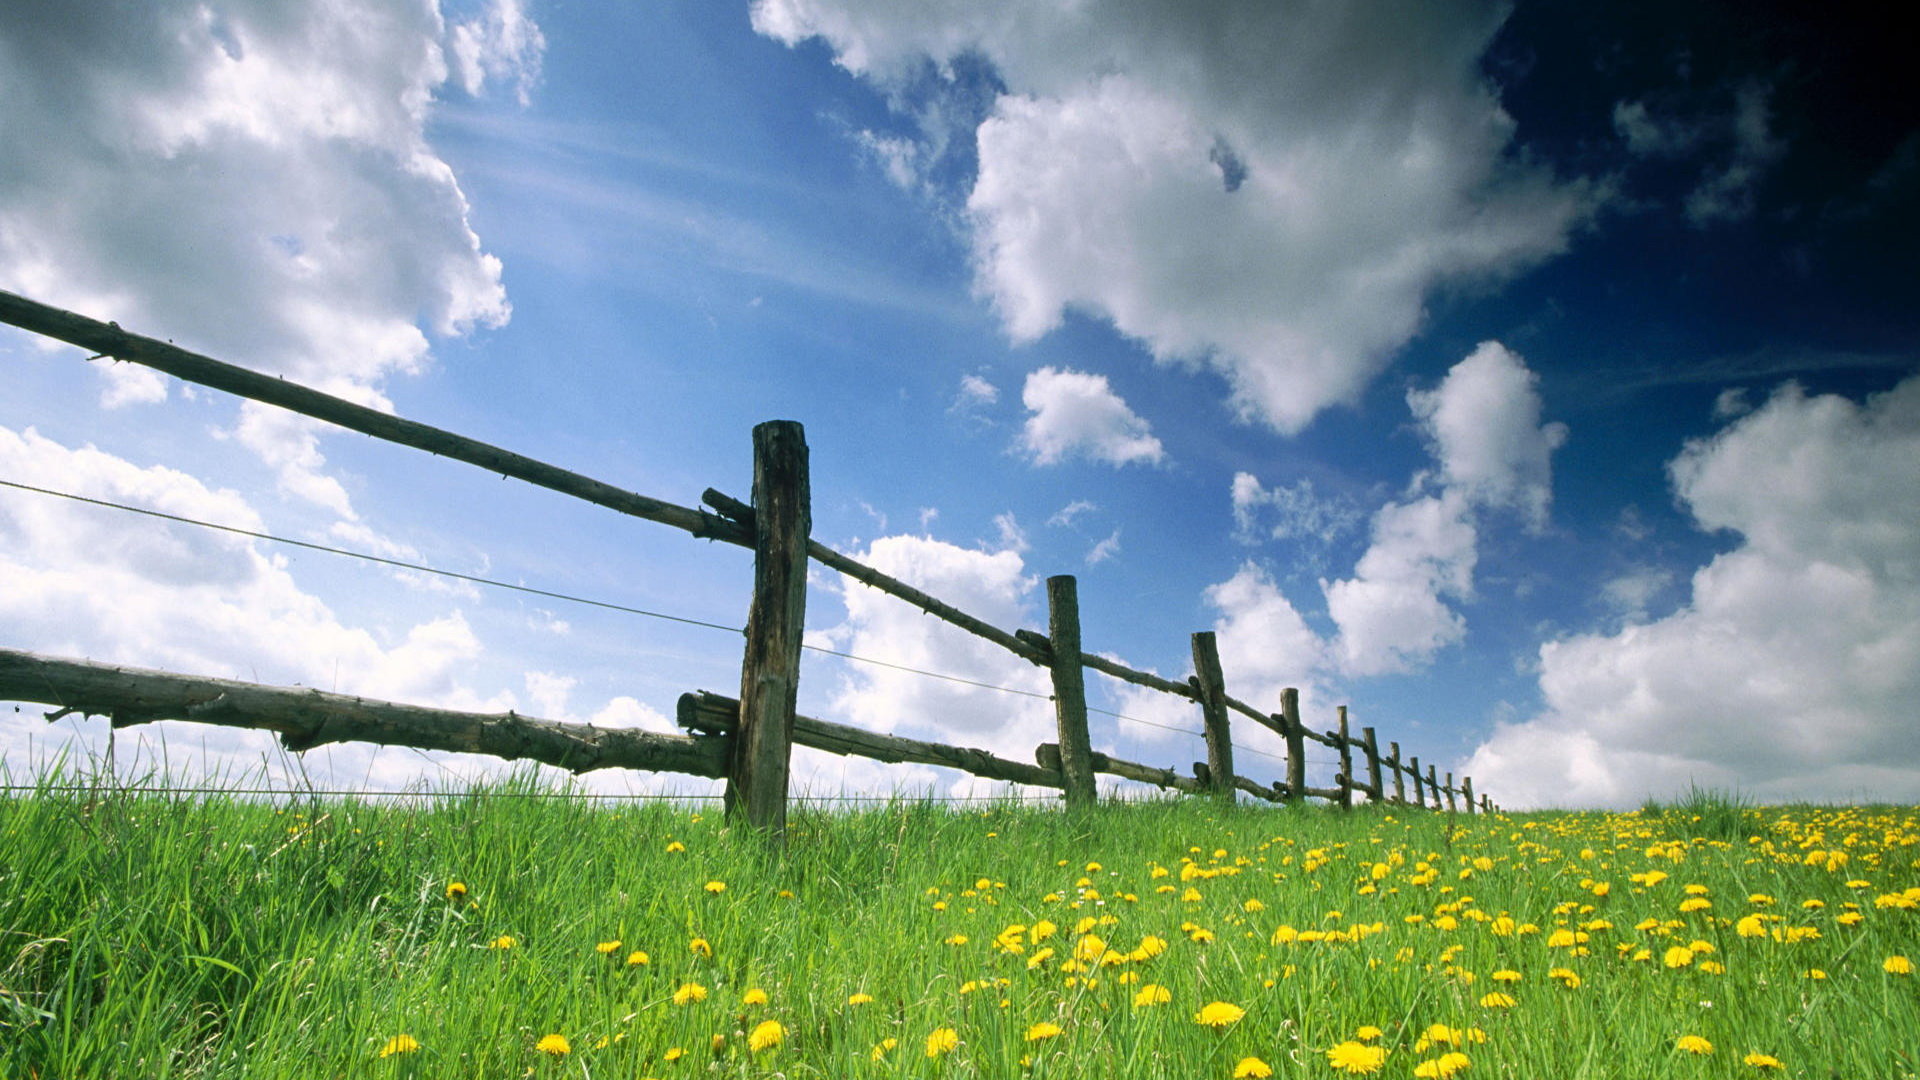 Download full hd 1920x1080 Fence PC wallpaper ID:23084 for free